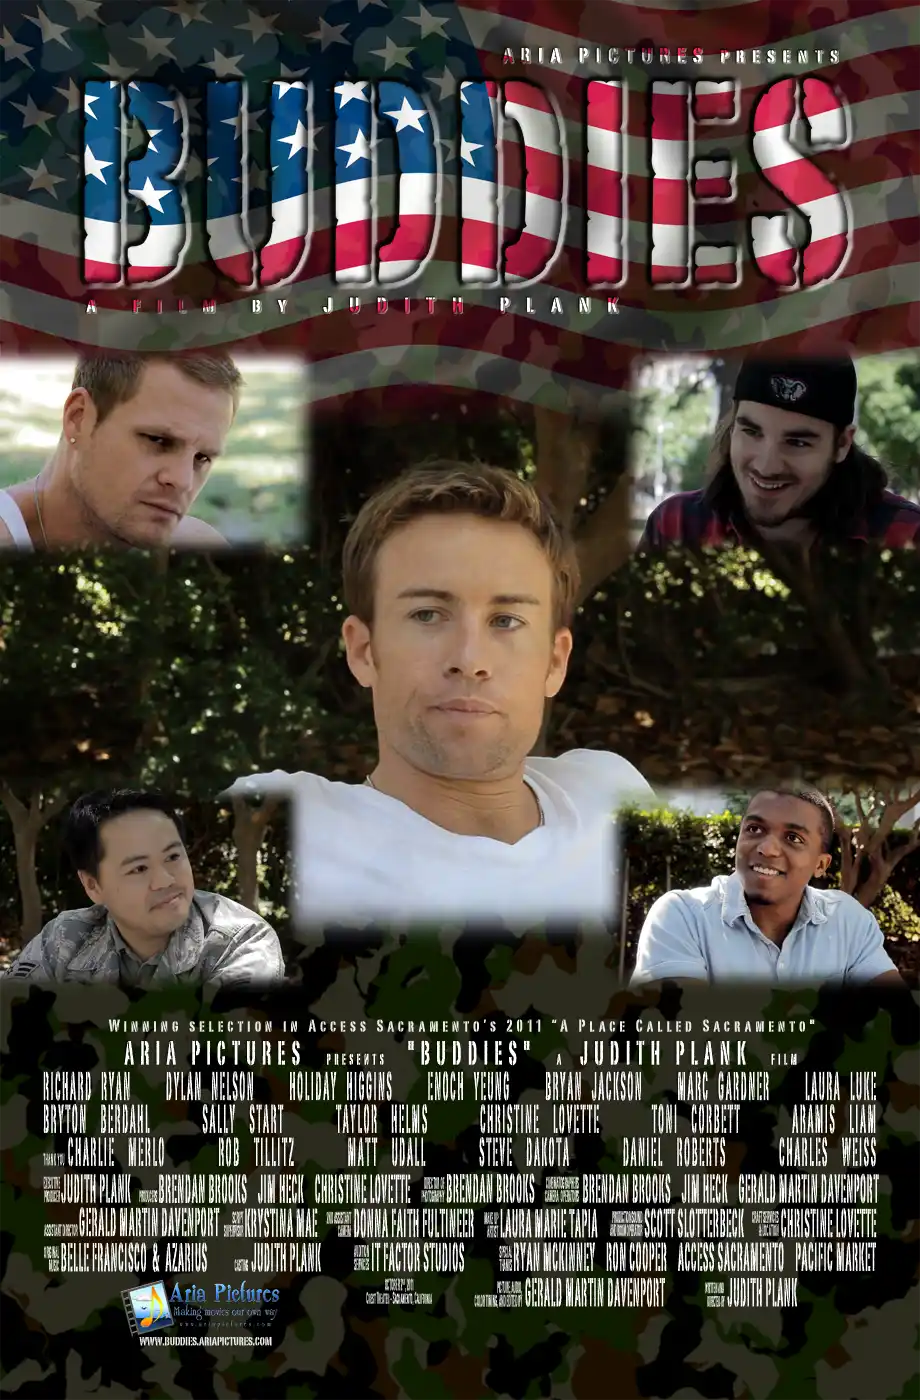 BUDDIES movie poster 2011 with cast and crew credits.